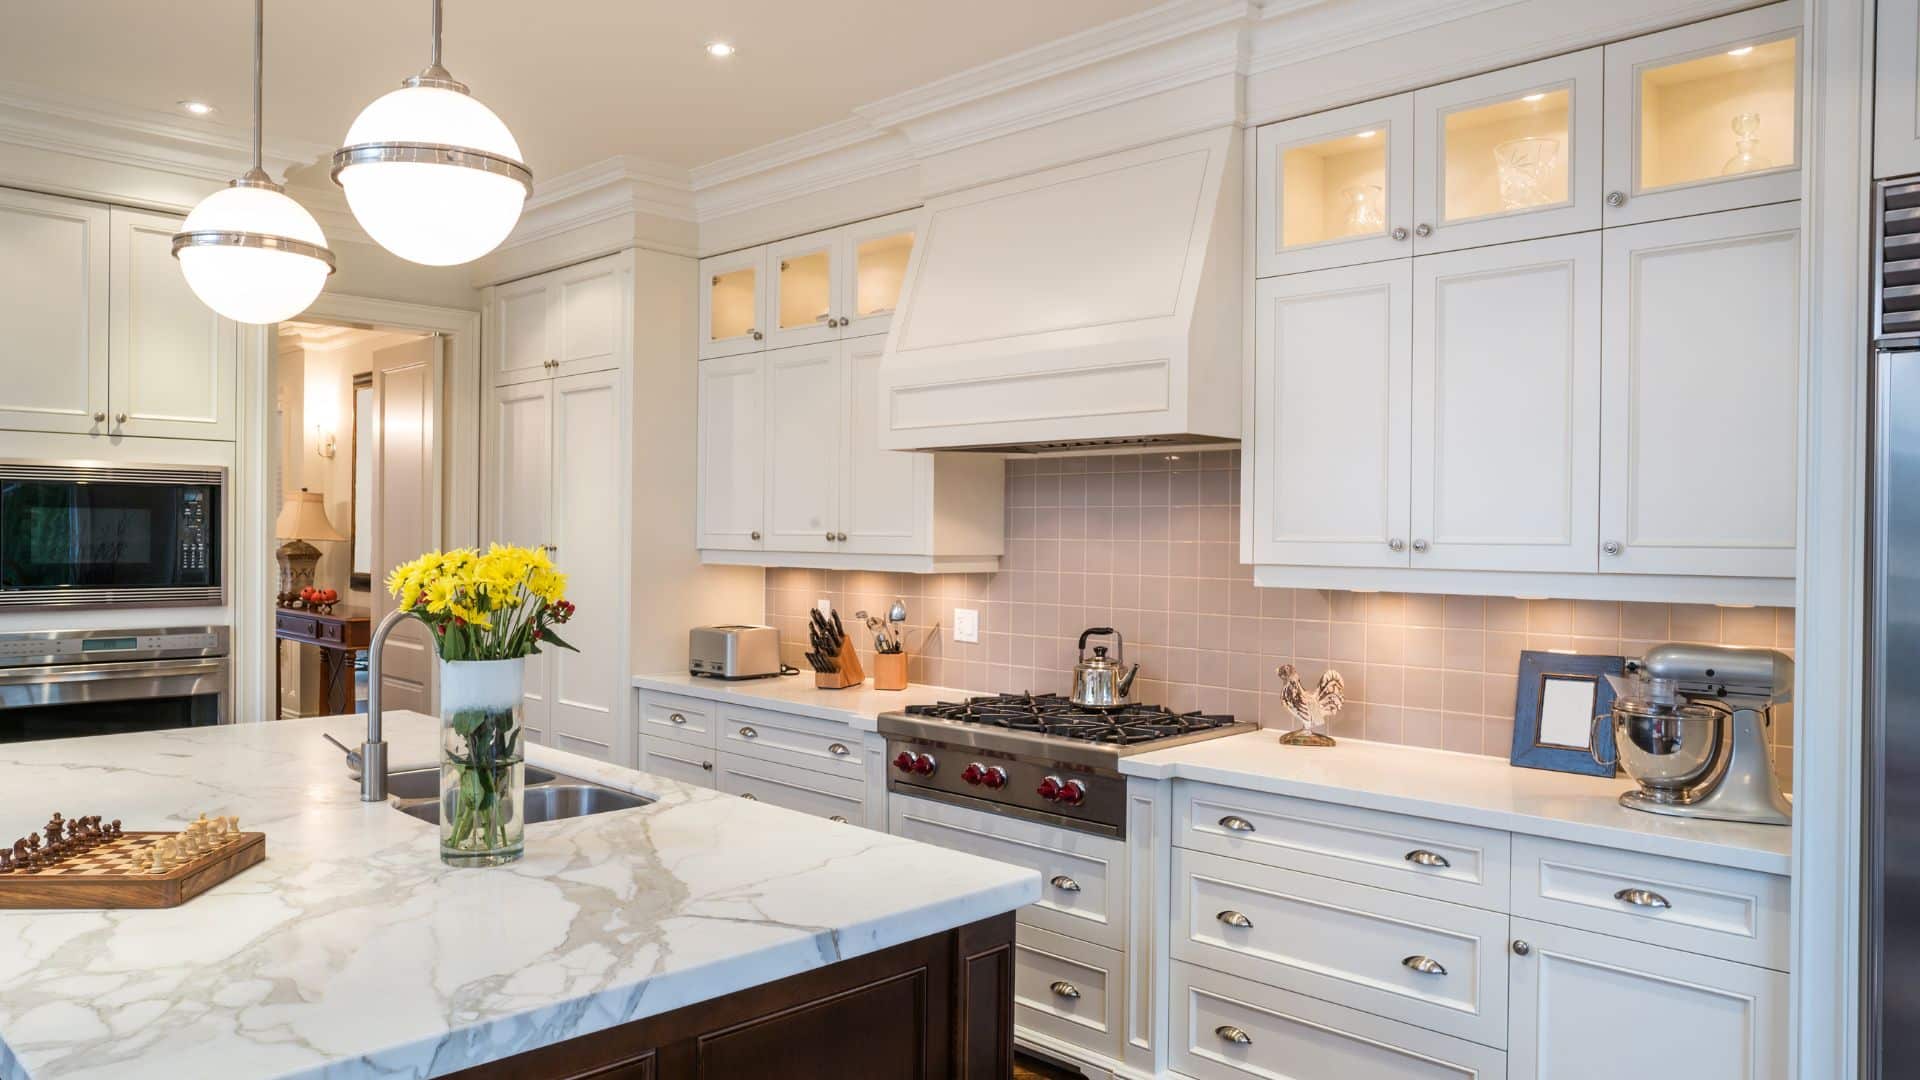 Spacious kitchen with white shaker cabinets